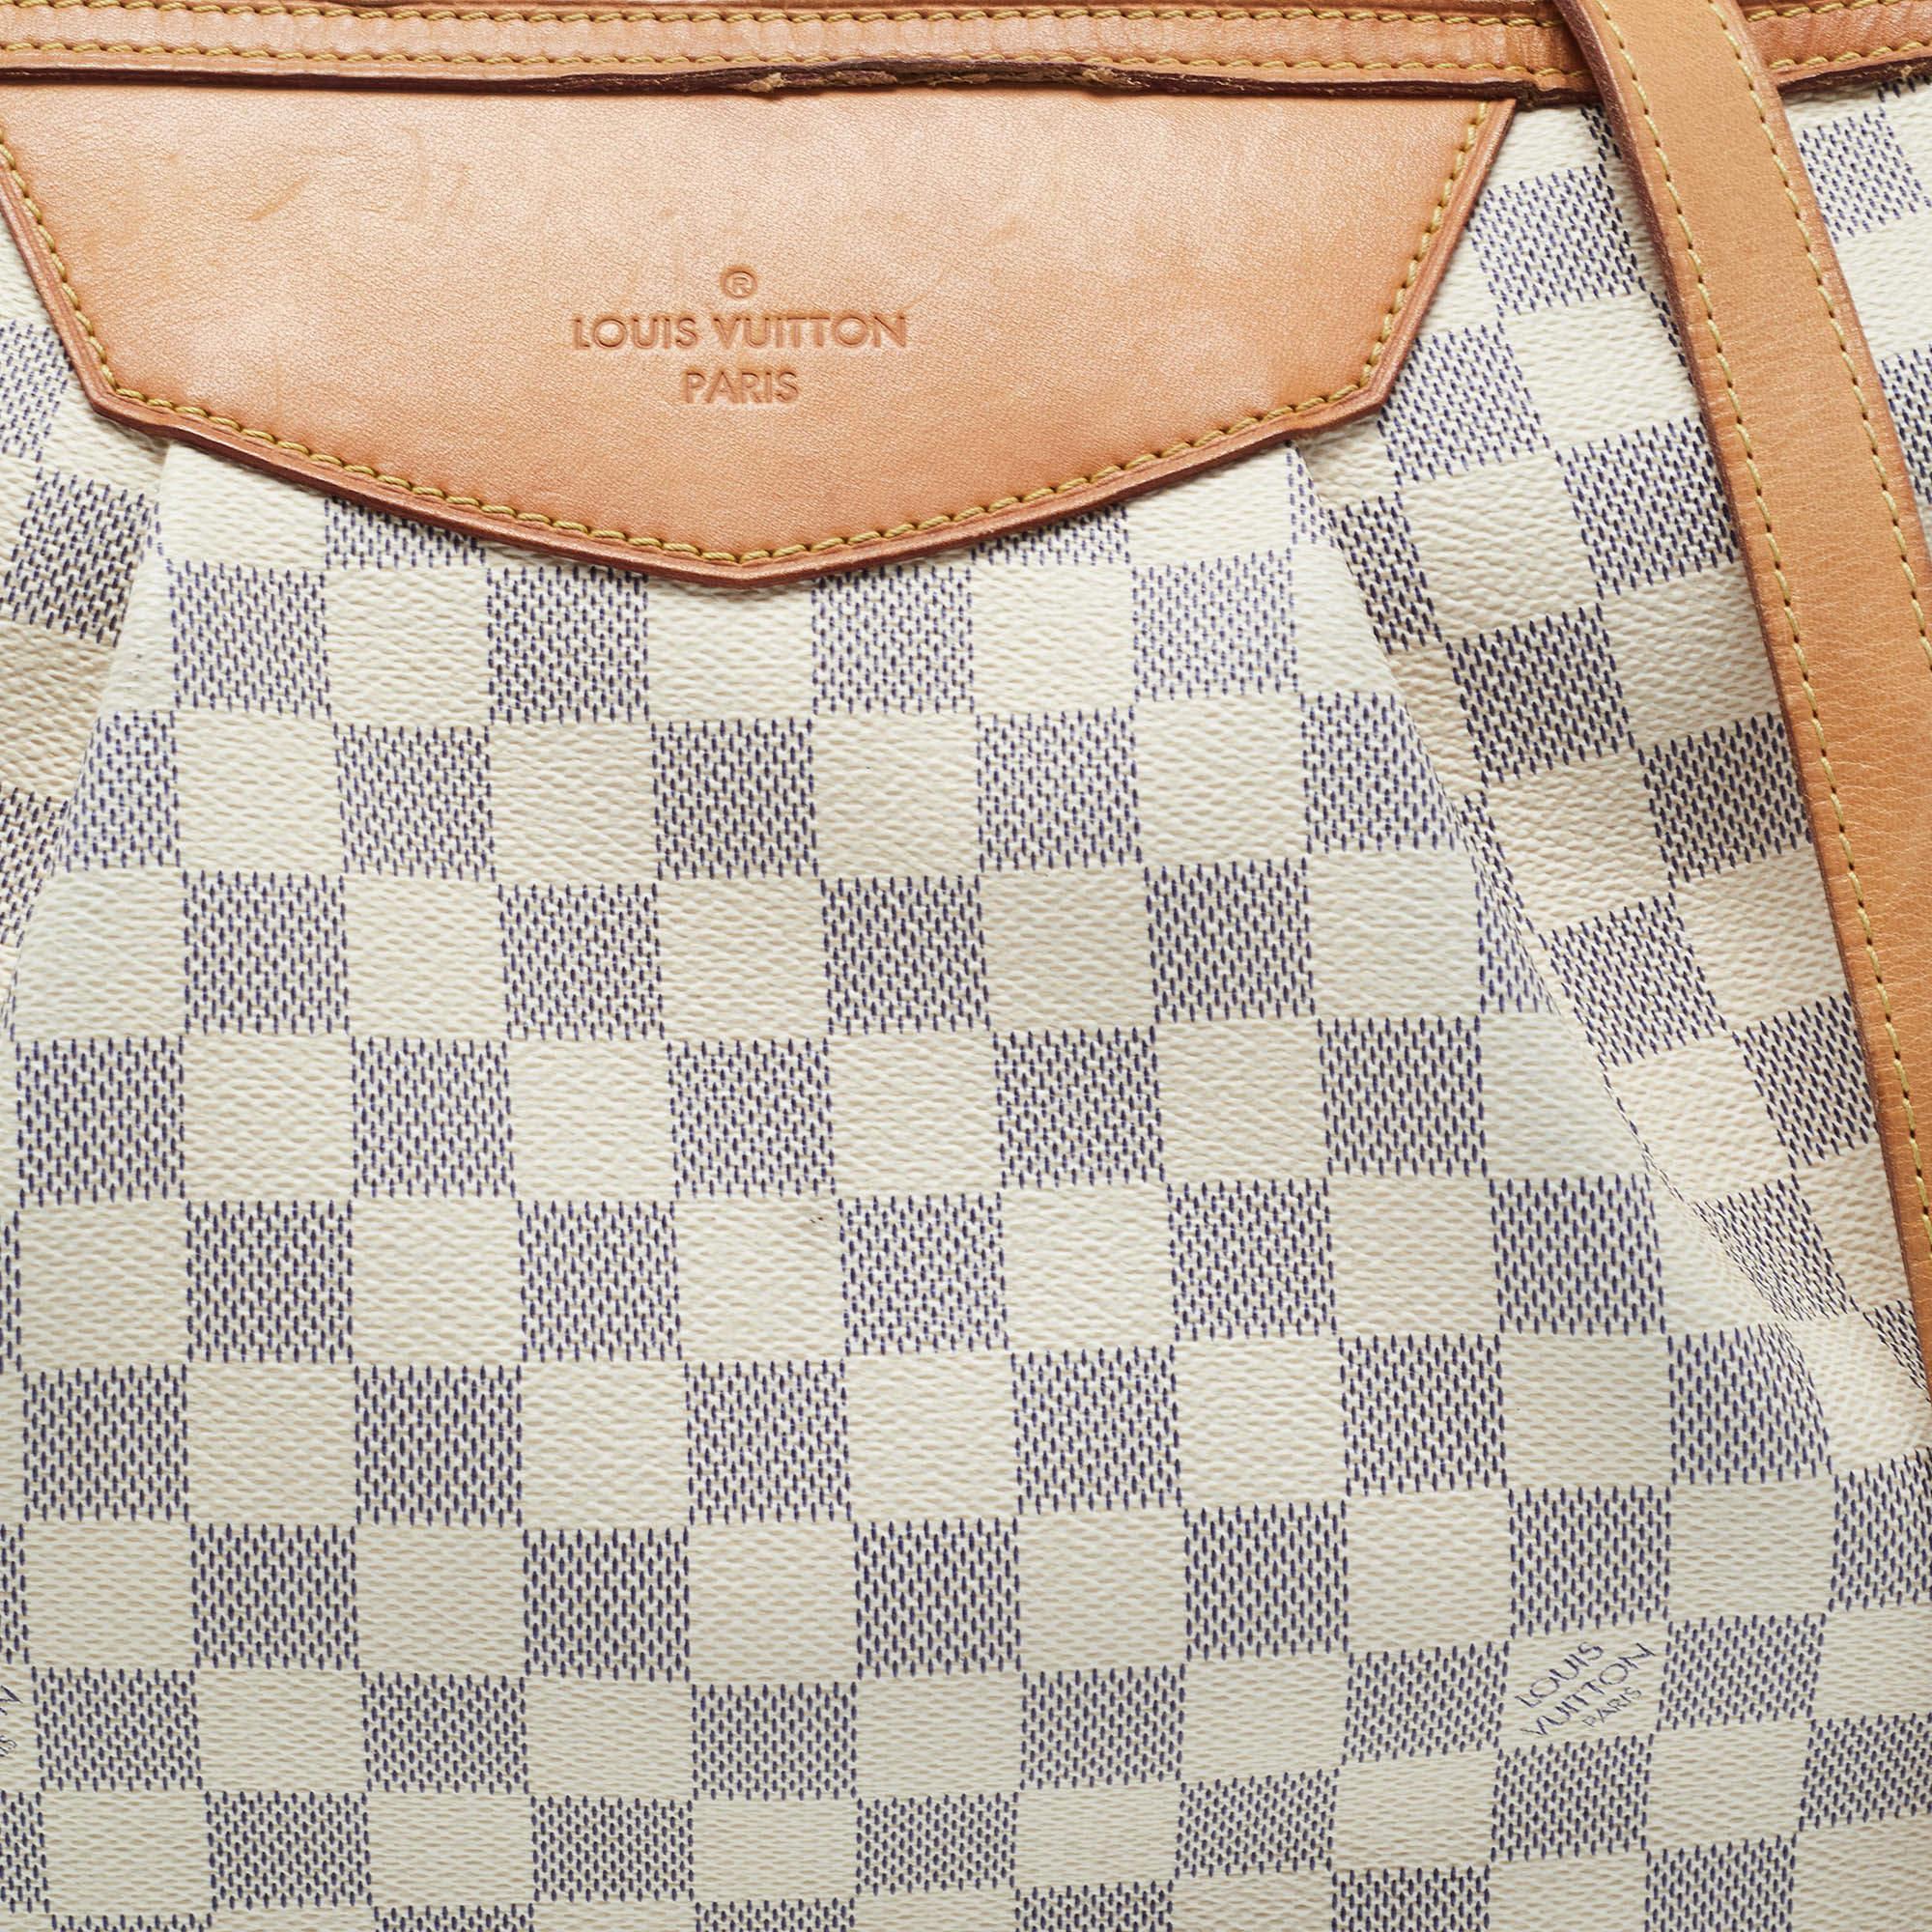 Louis Vuitton Damier Azur Canvas and Leather Siracusa MM Bag For Sale 15